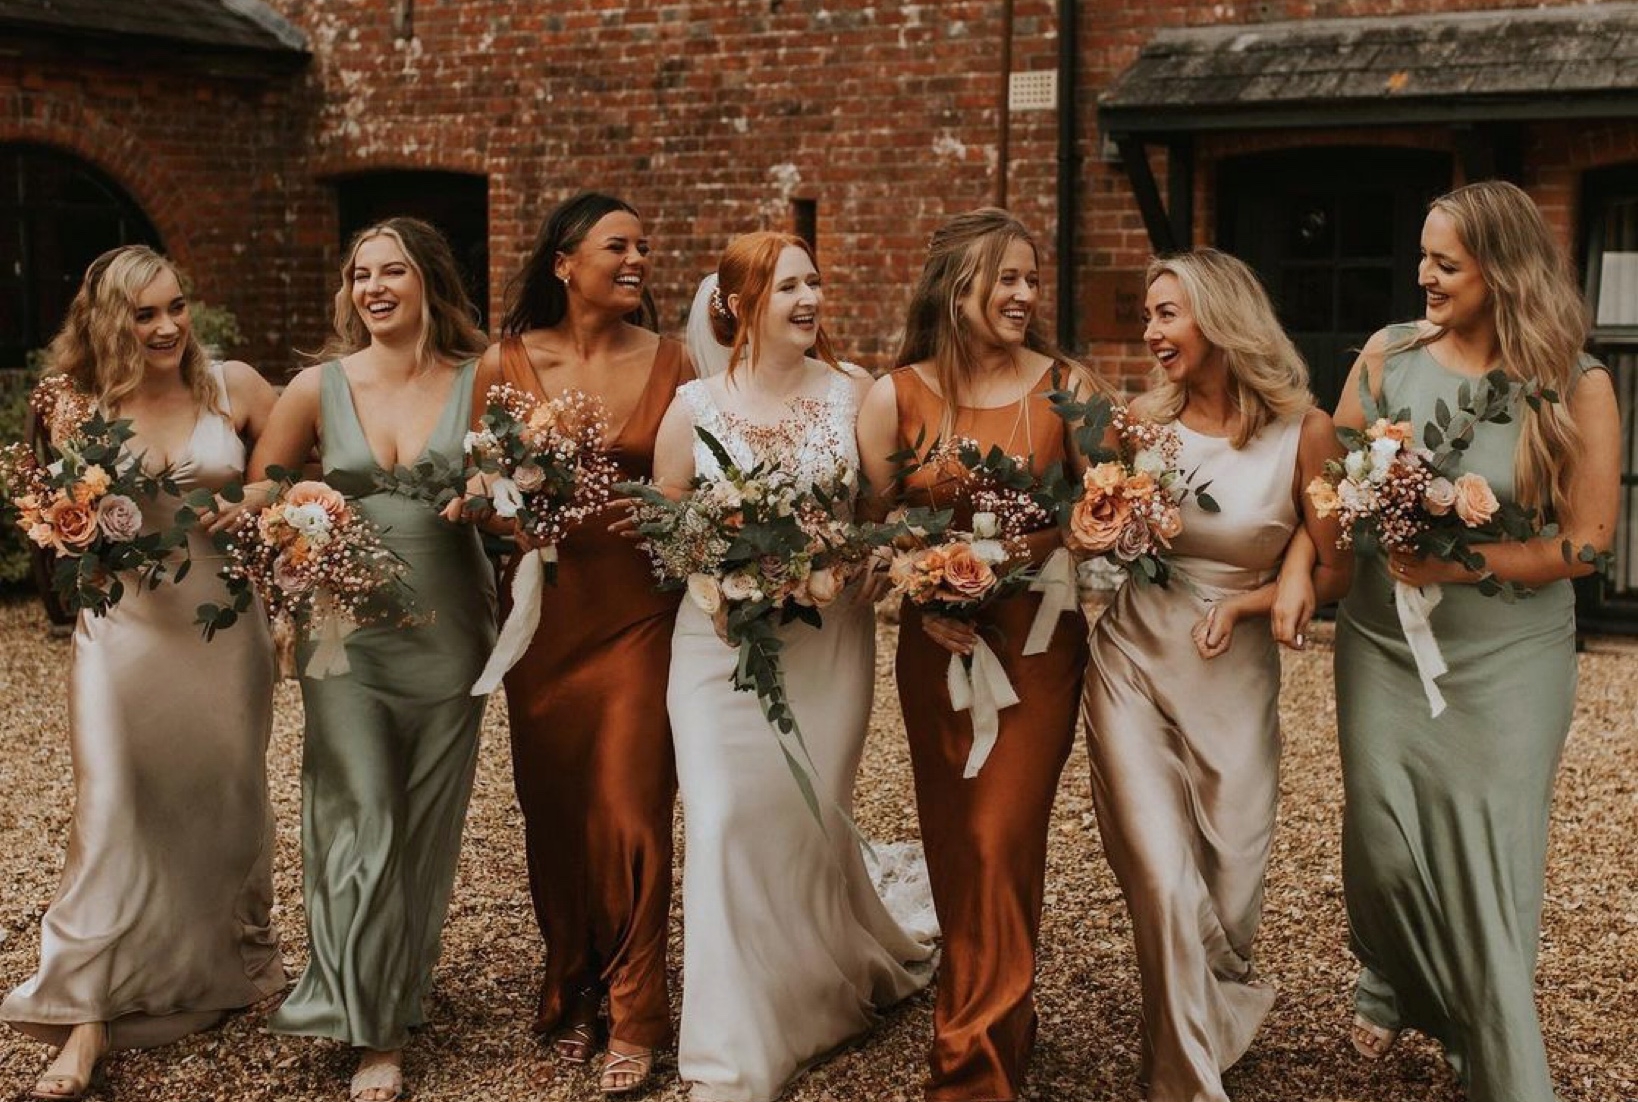 Who Pays for Bridesmaid Dresses?